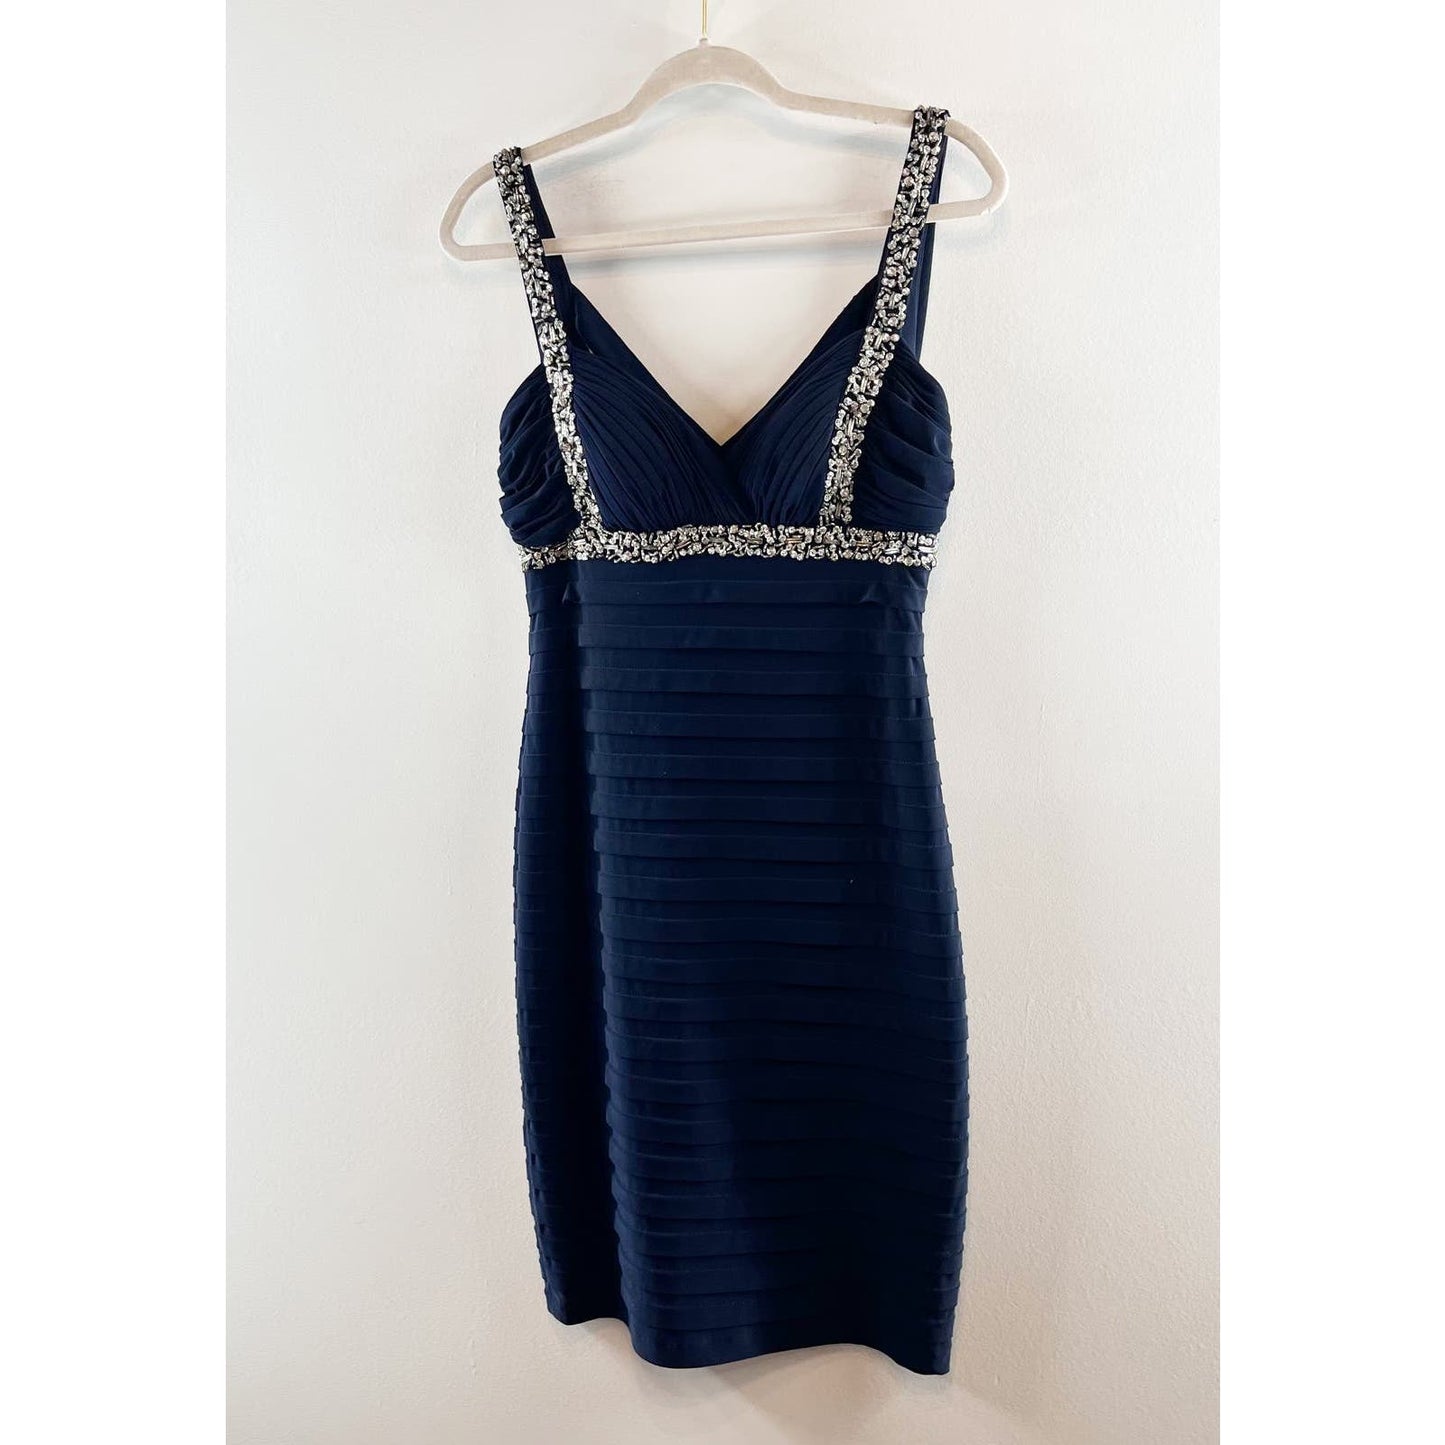 Betsy & Adam Embroidered Sequin Strap Cross Back Mini Bodycon Dress Navy Blue 8